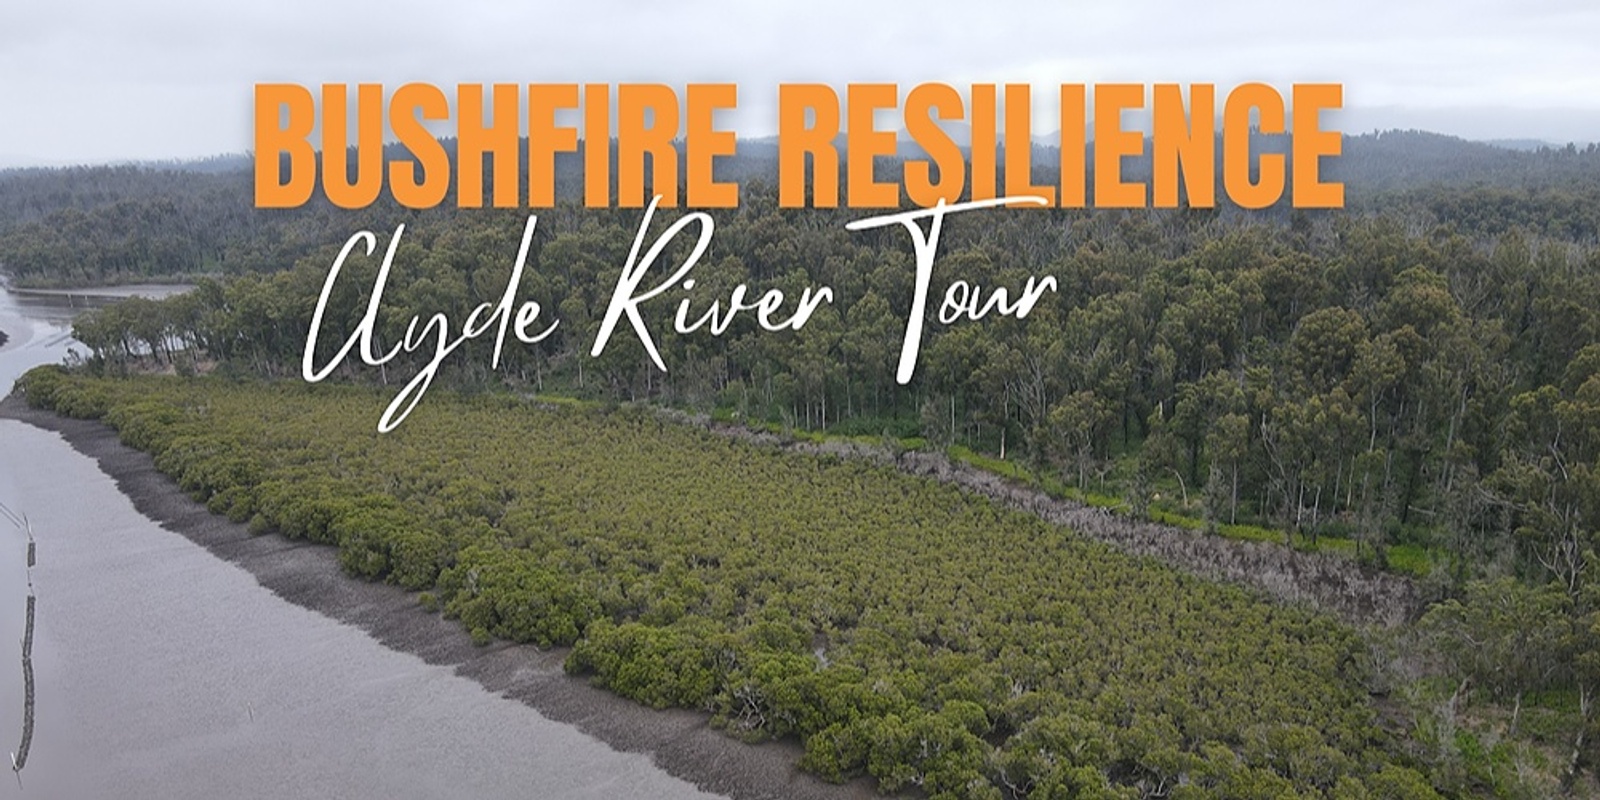 Banner image for Bushfire Resilience Clyde River Boat Tour